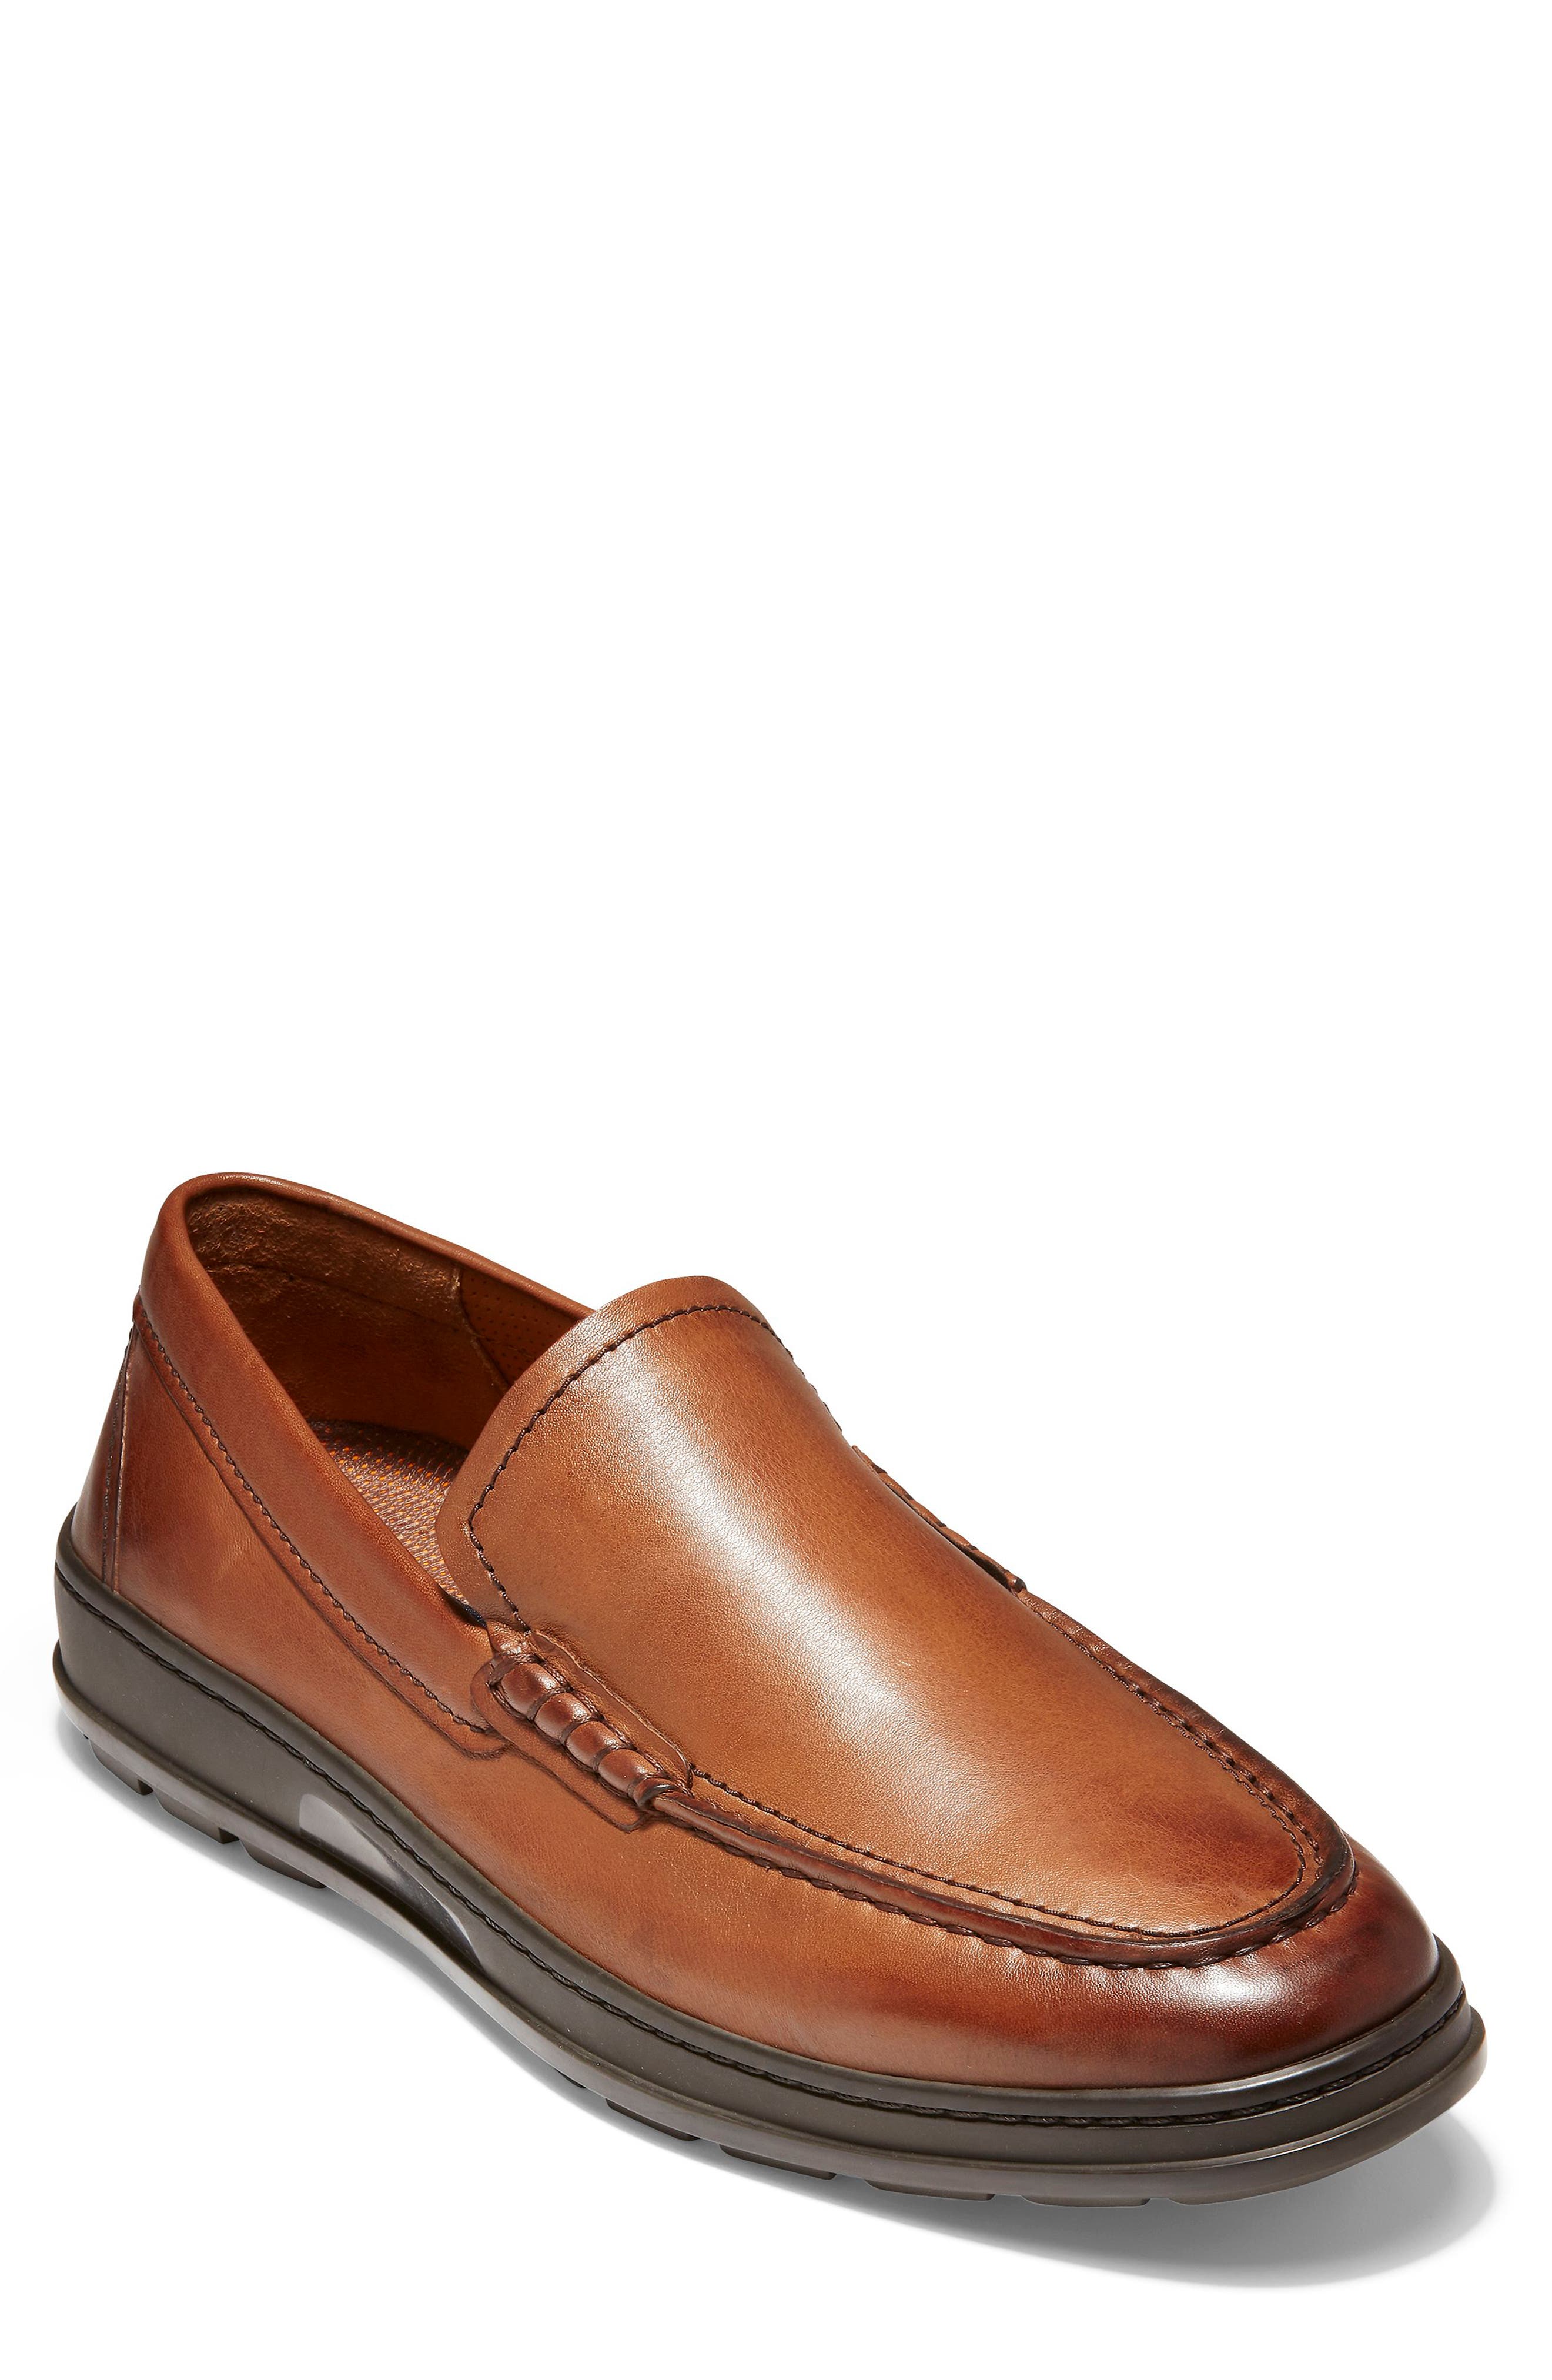 nordstrom mens driving shoes